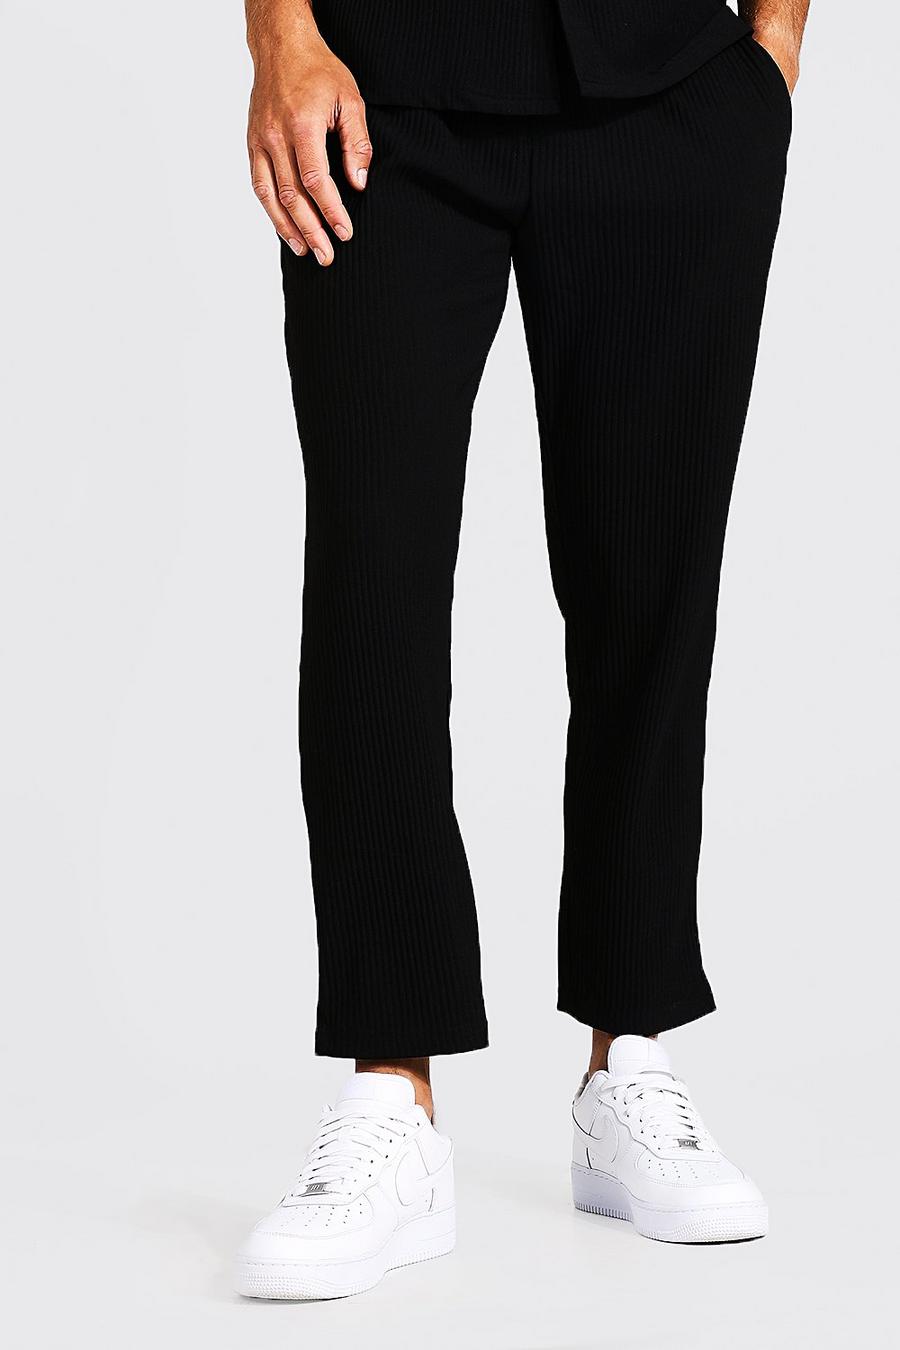 Black Tall Slim Fit Pleated Crop Trousers image number 1